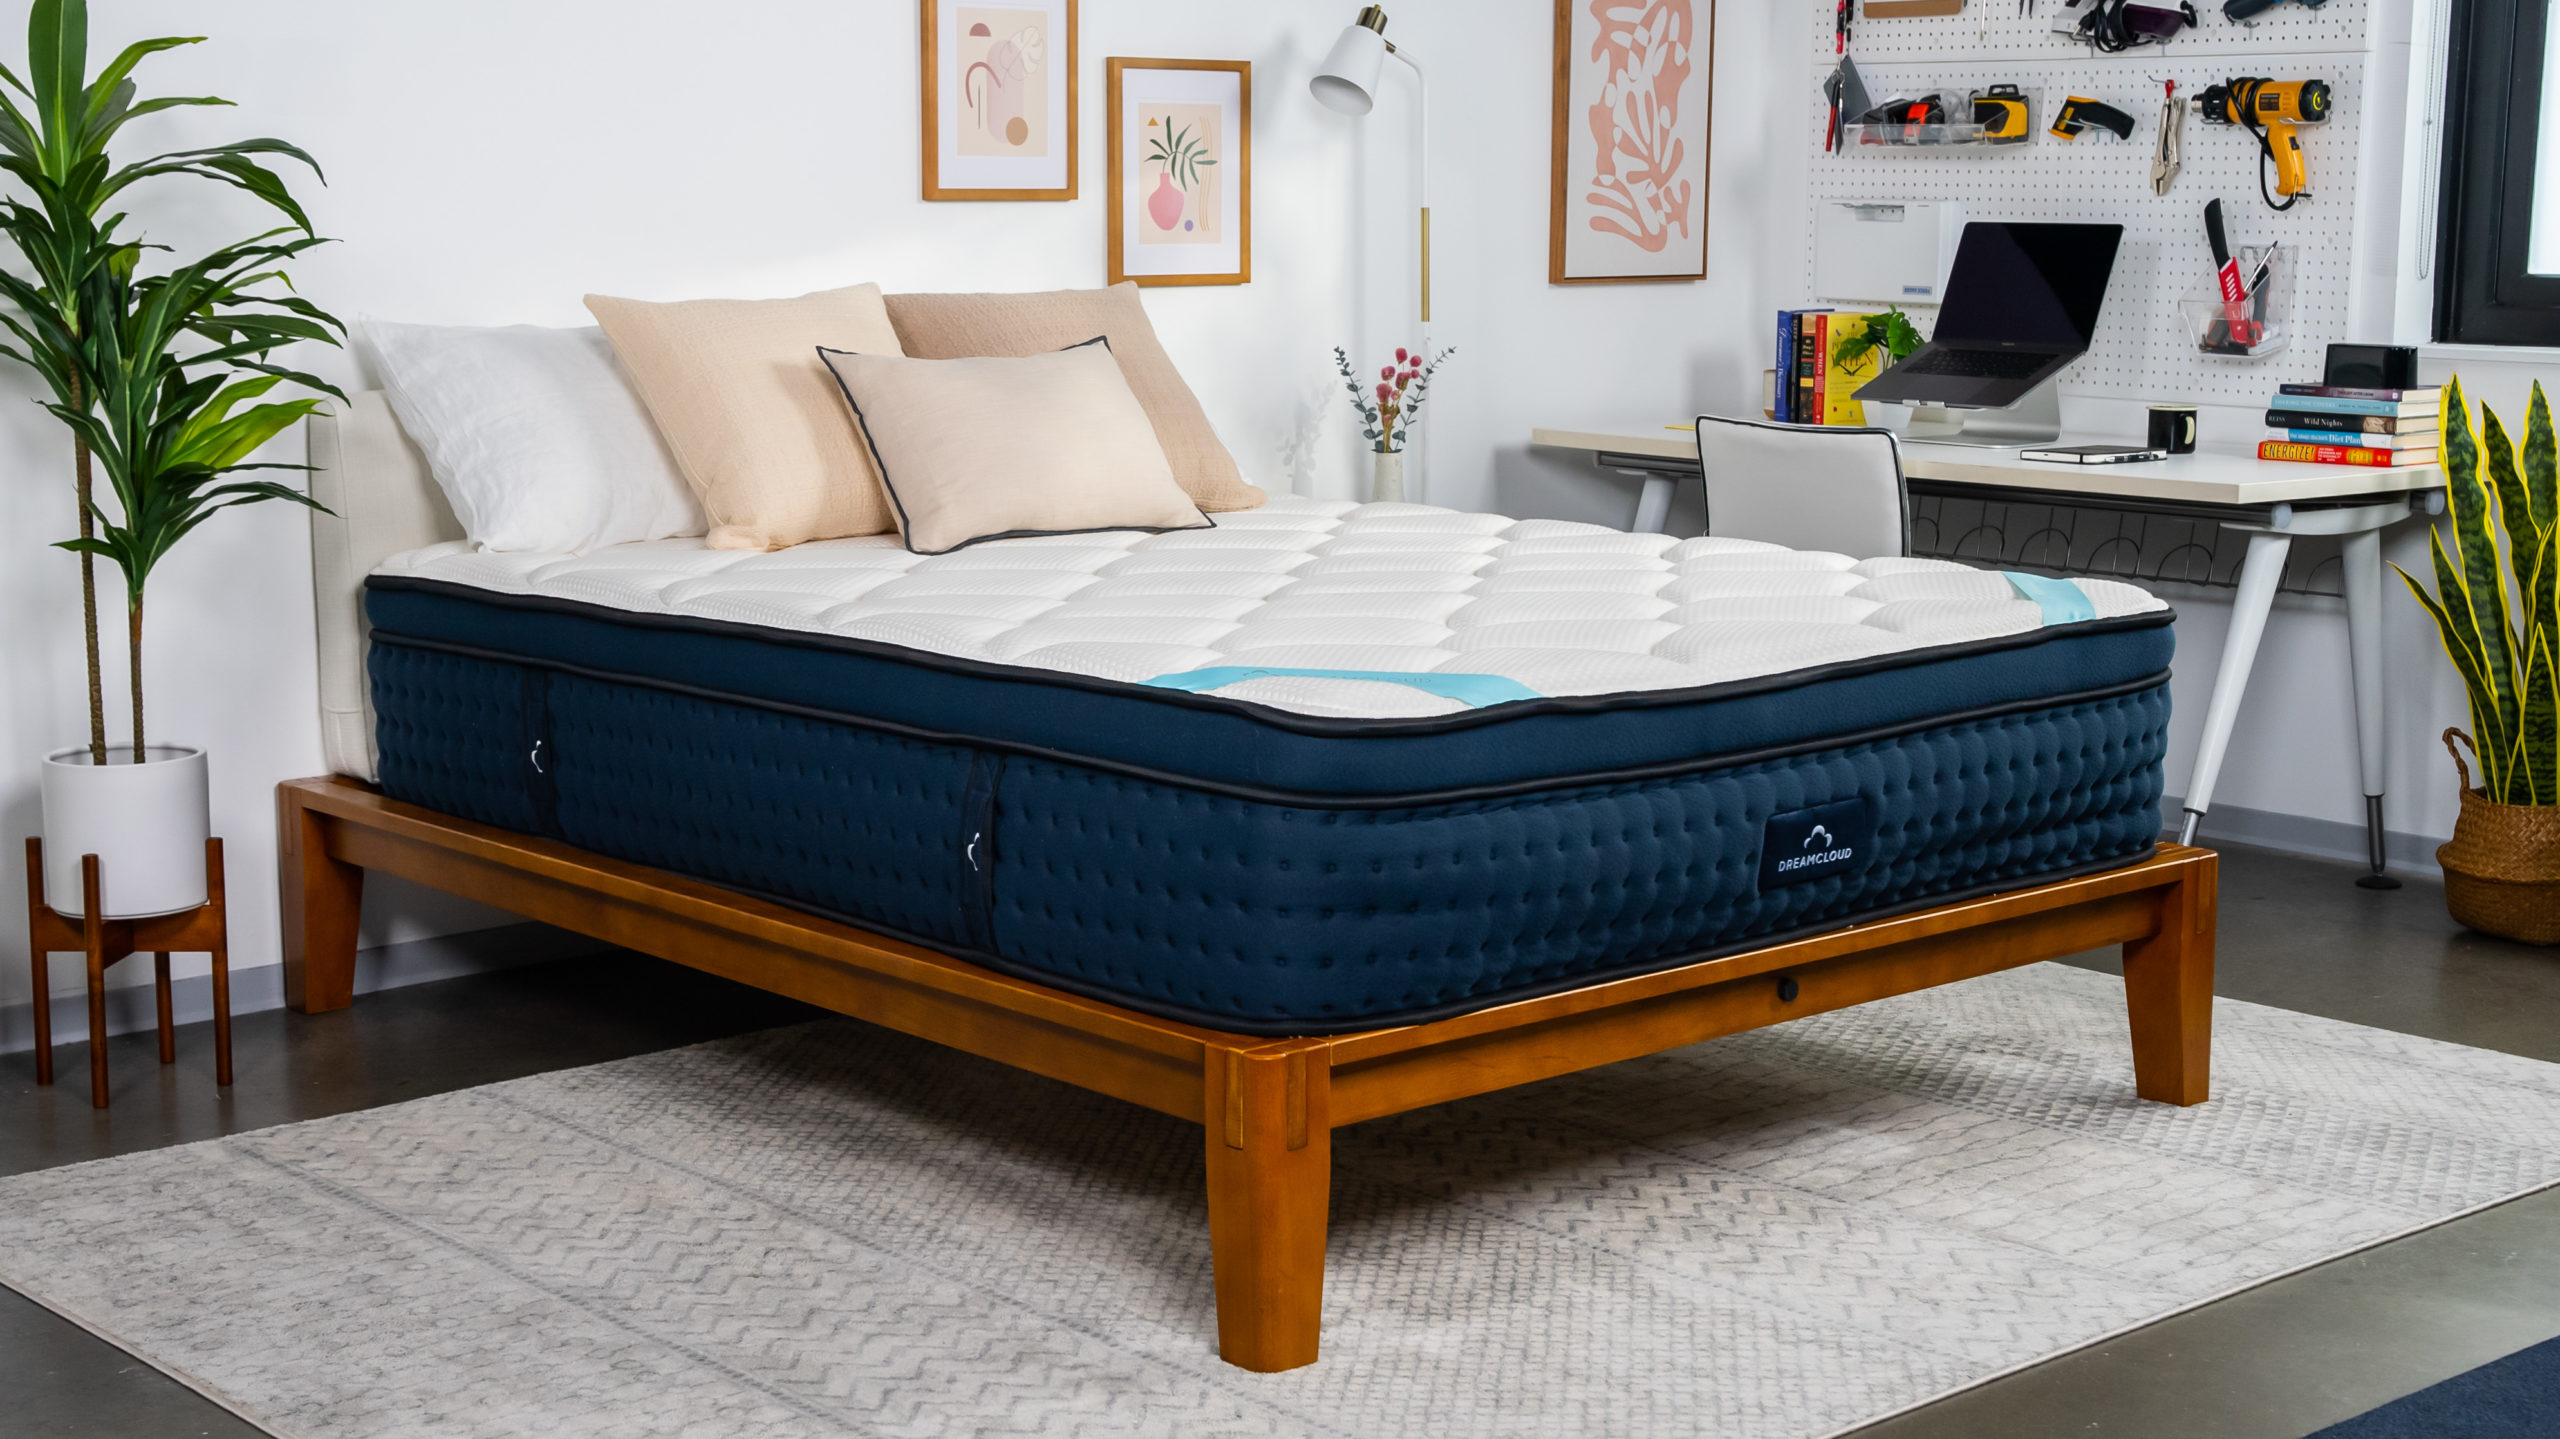 Options To Make Your Mattress Higher